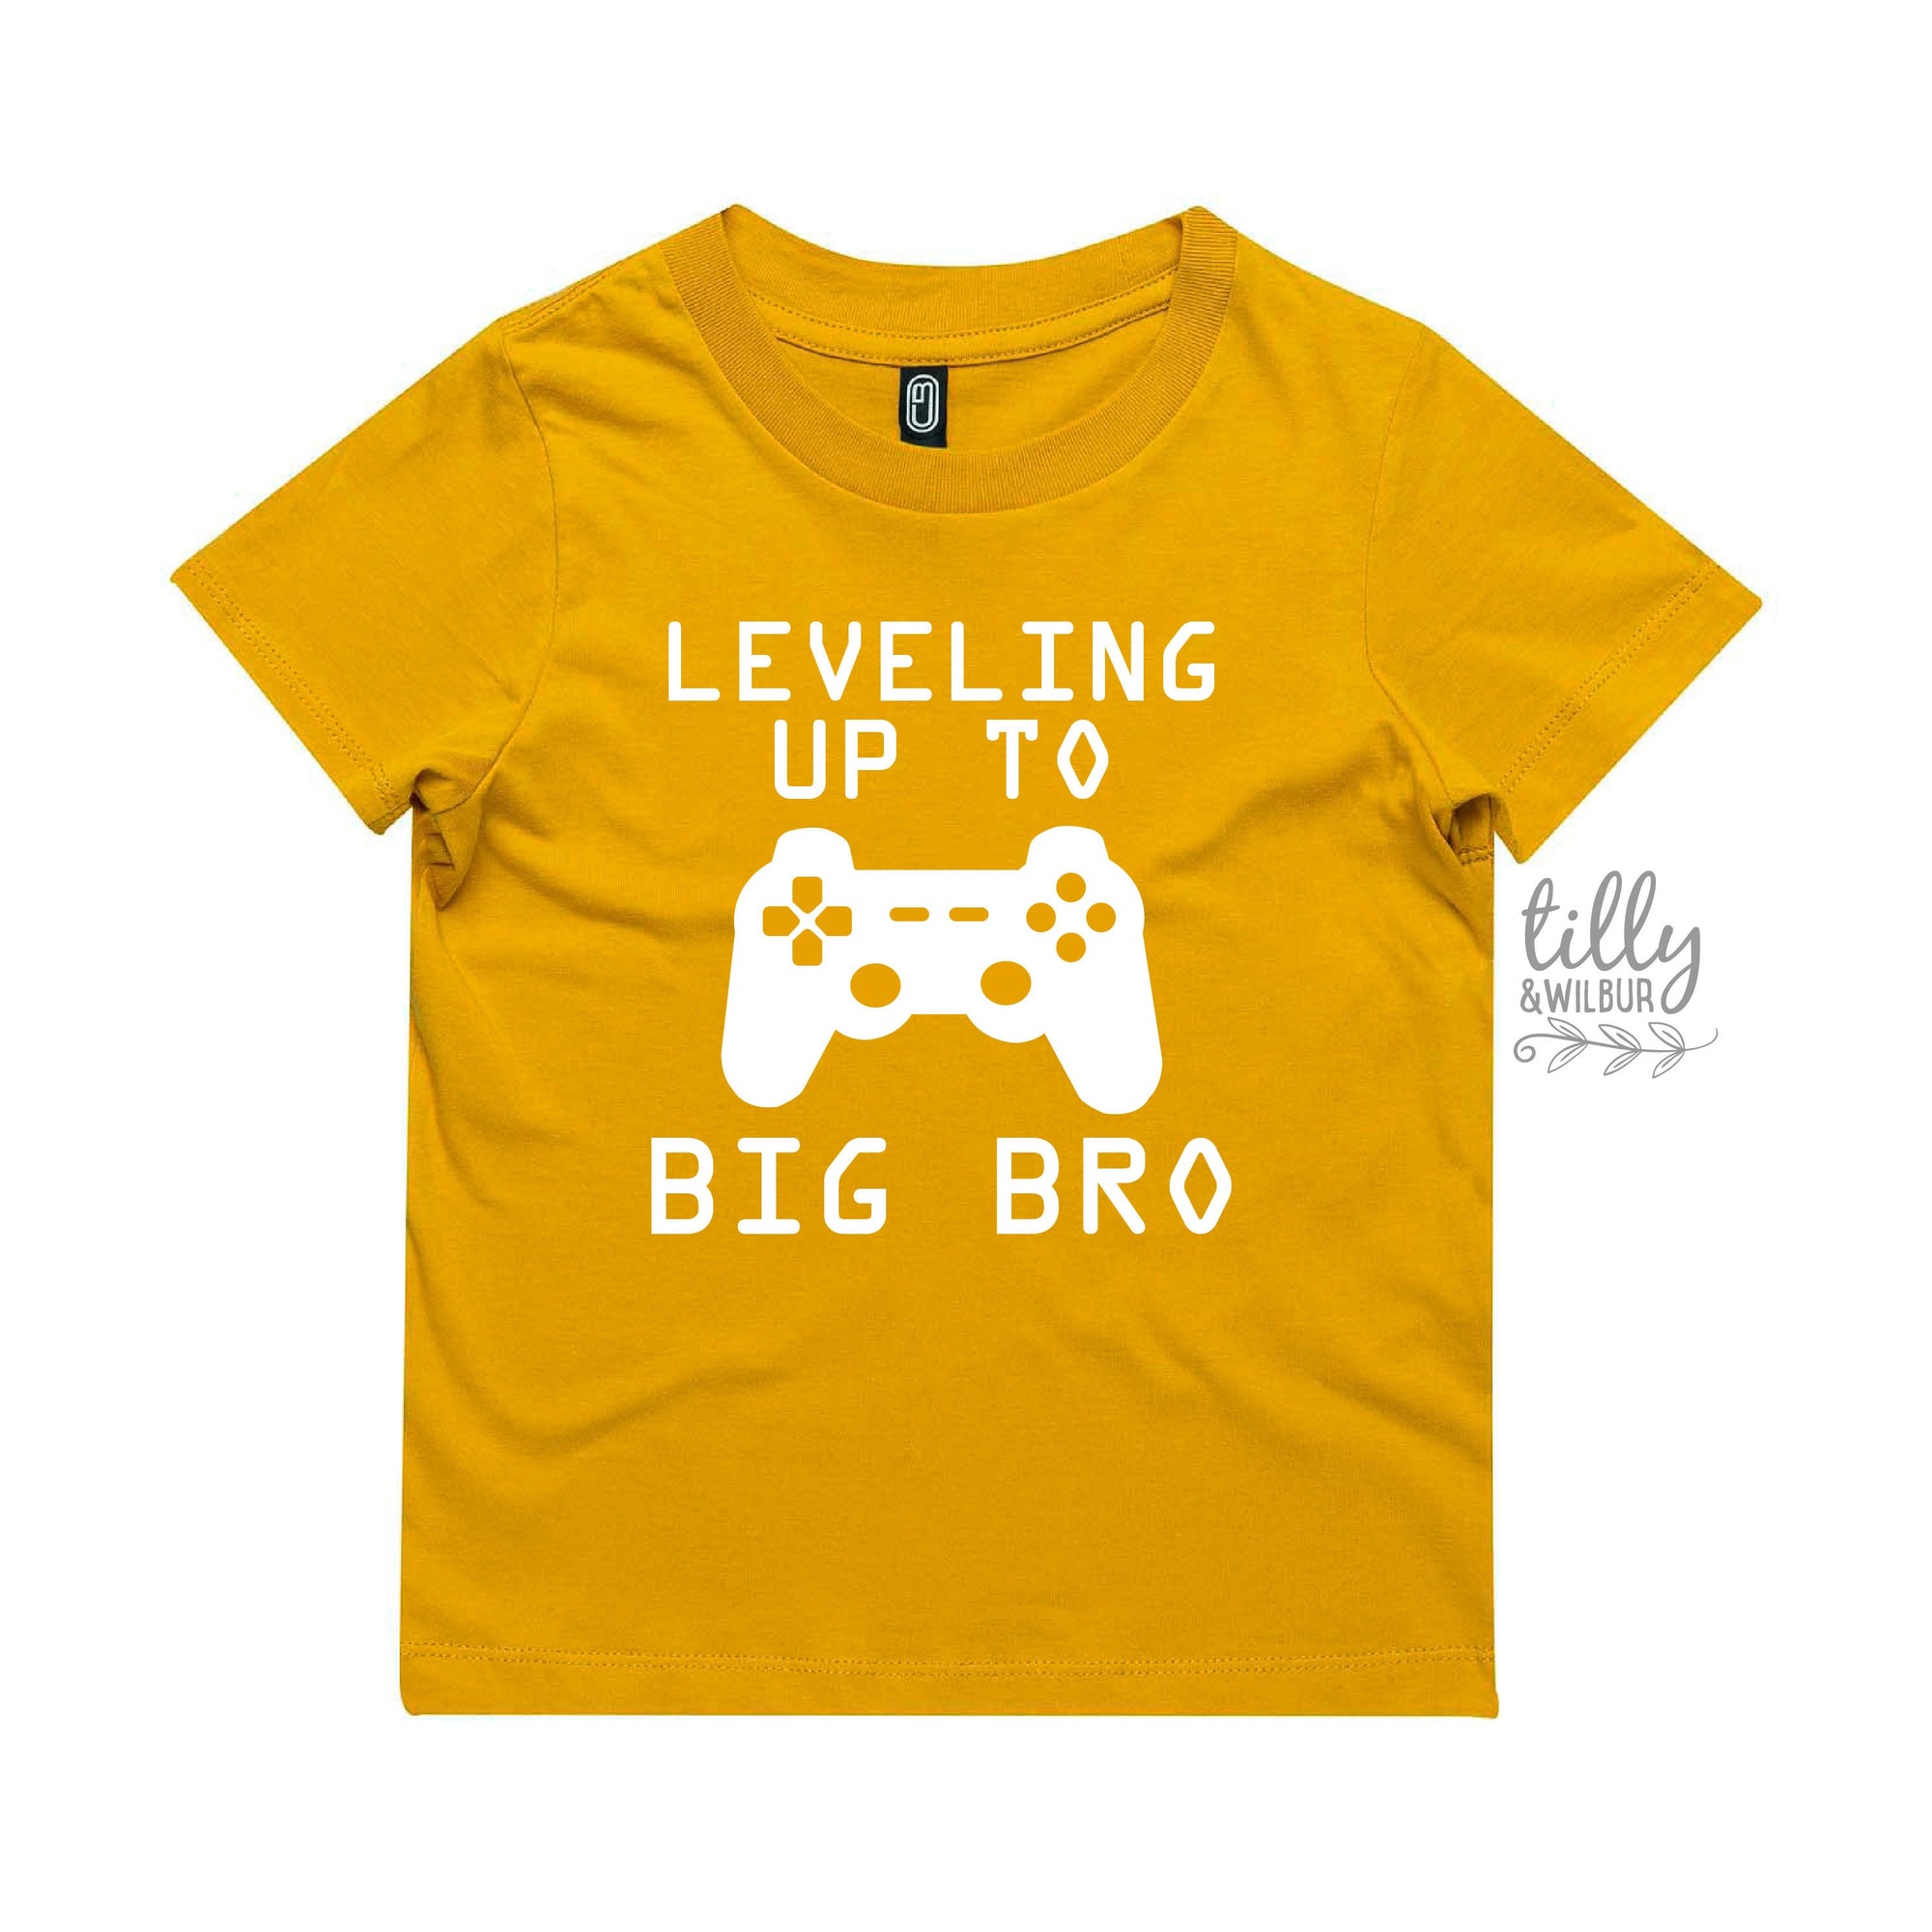 Big Brother T-Shirt, Leveling Up To Big Brother T-Shirt, Promoted To Big Brother T-Shirt, I'm Going To Be A Big Brother T-Shirt, Gamer Shirt